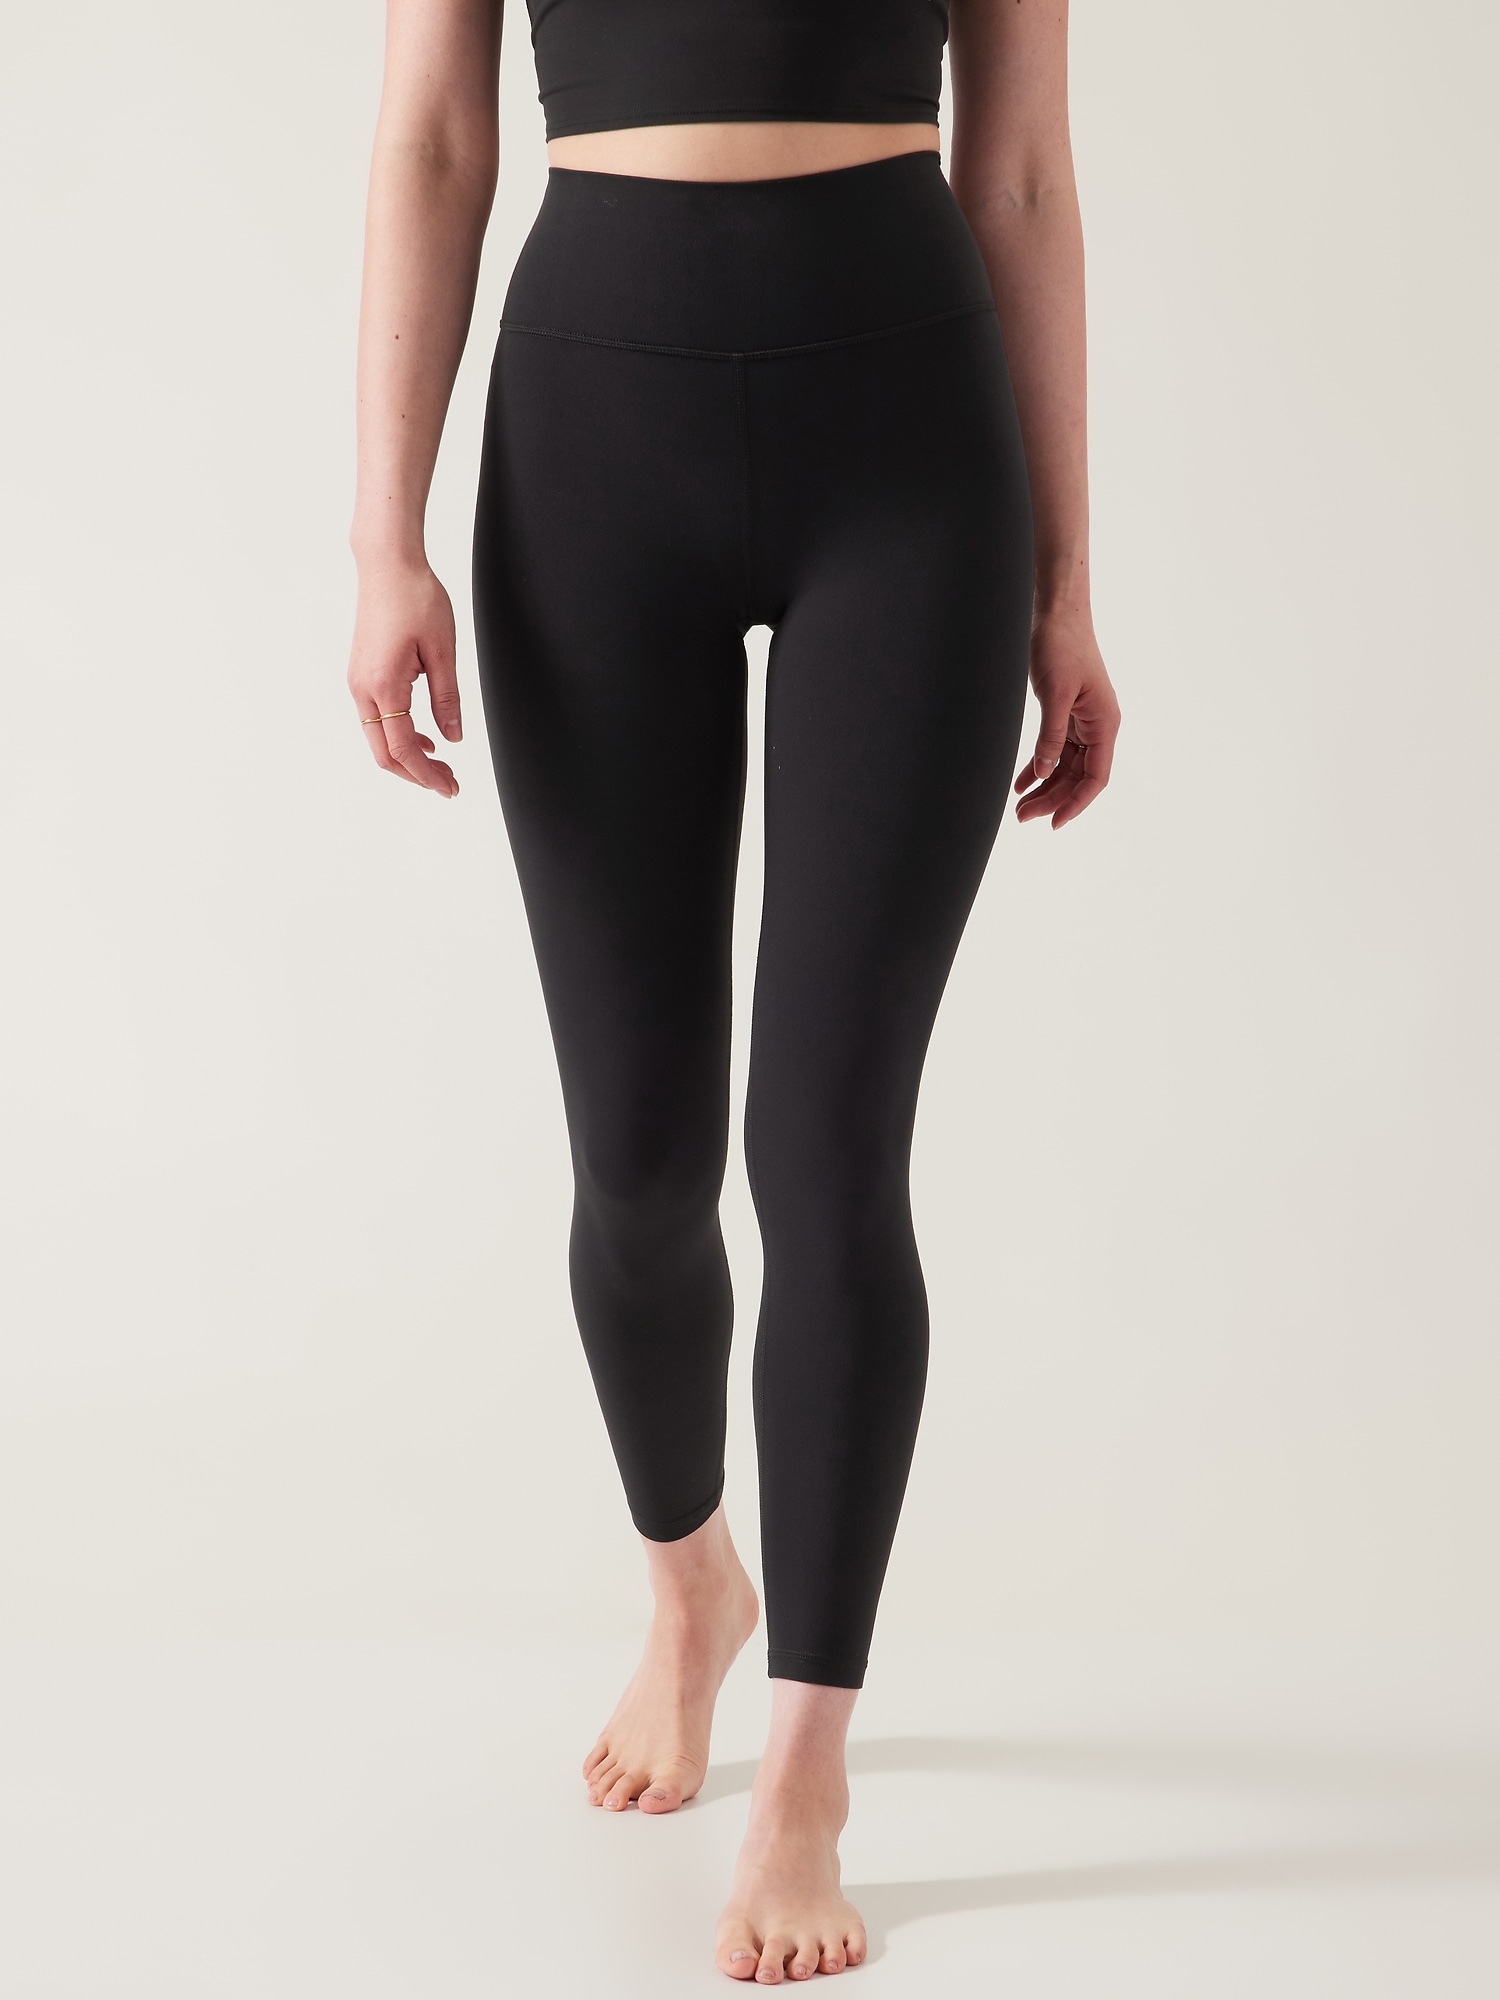 Aerie Chill high waisted legging review: Are they better than Lululemon? -  Reviewed